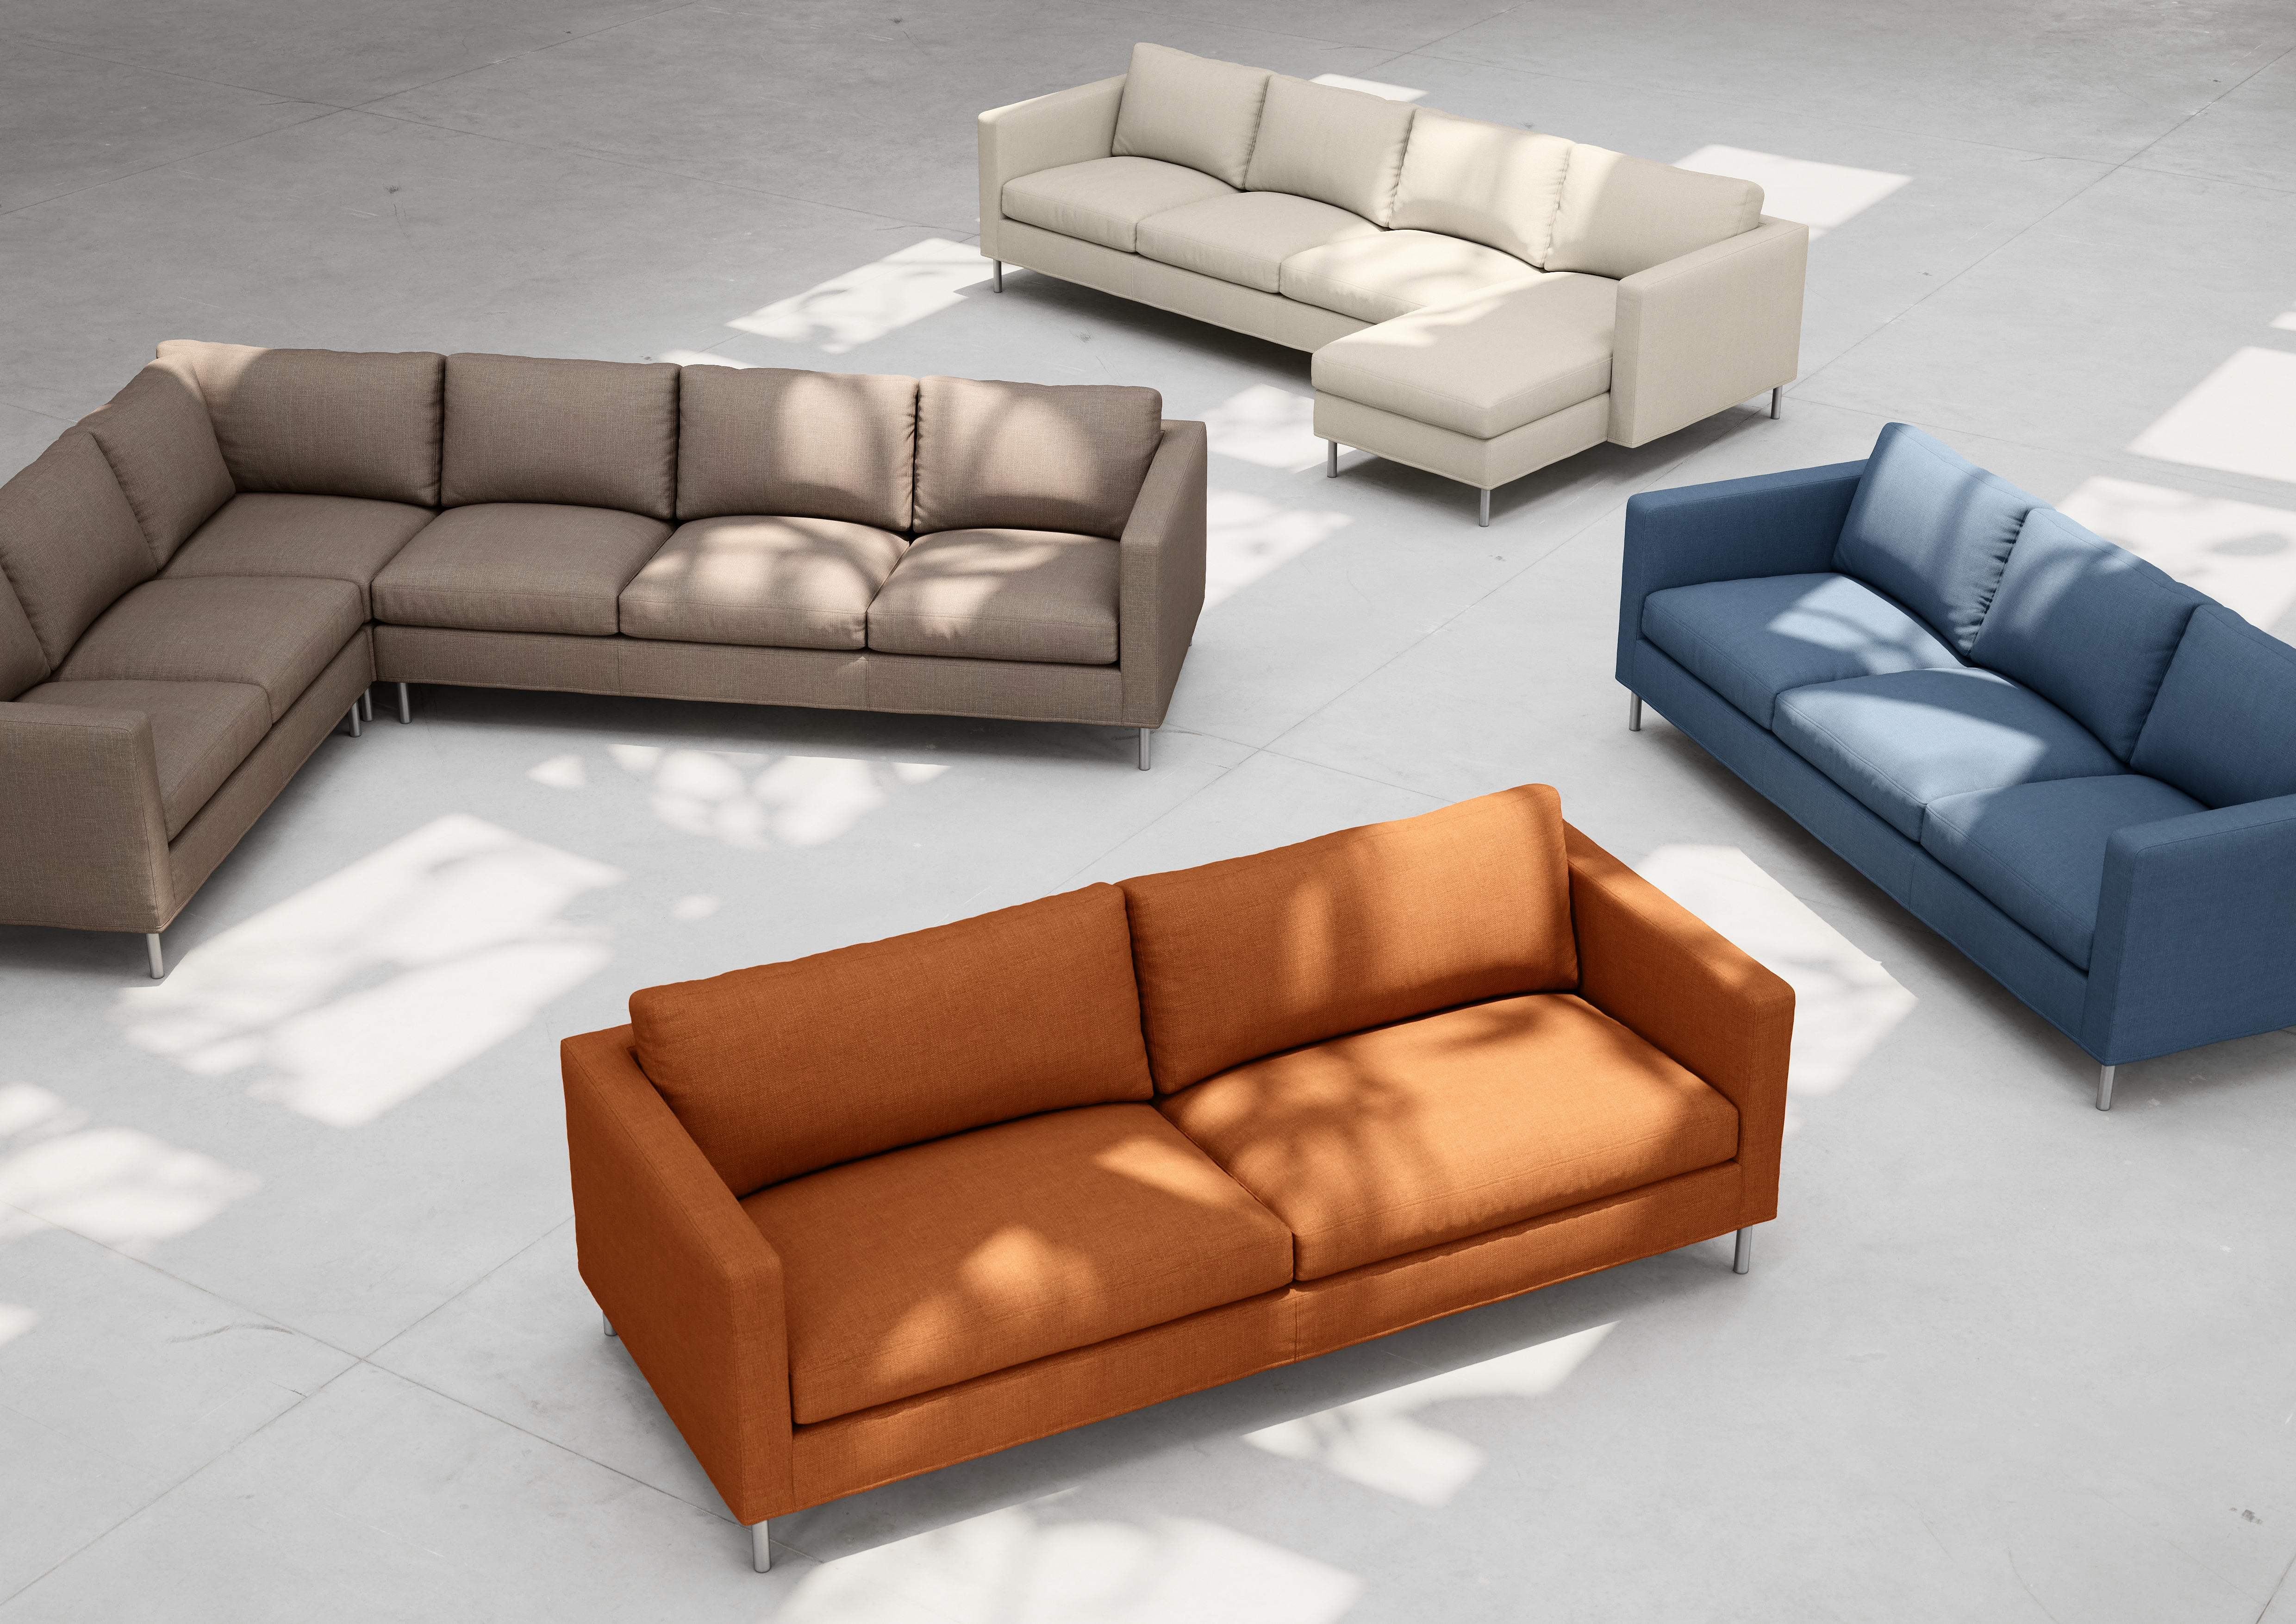 Alex Sofas & Seating Systems 2.5 - seater in 26